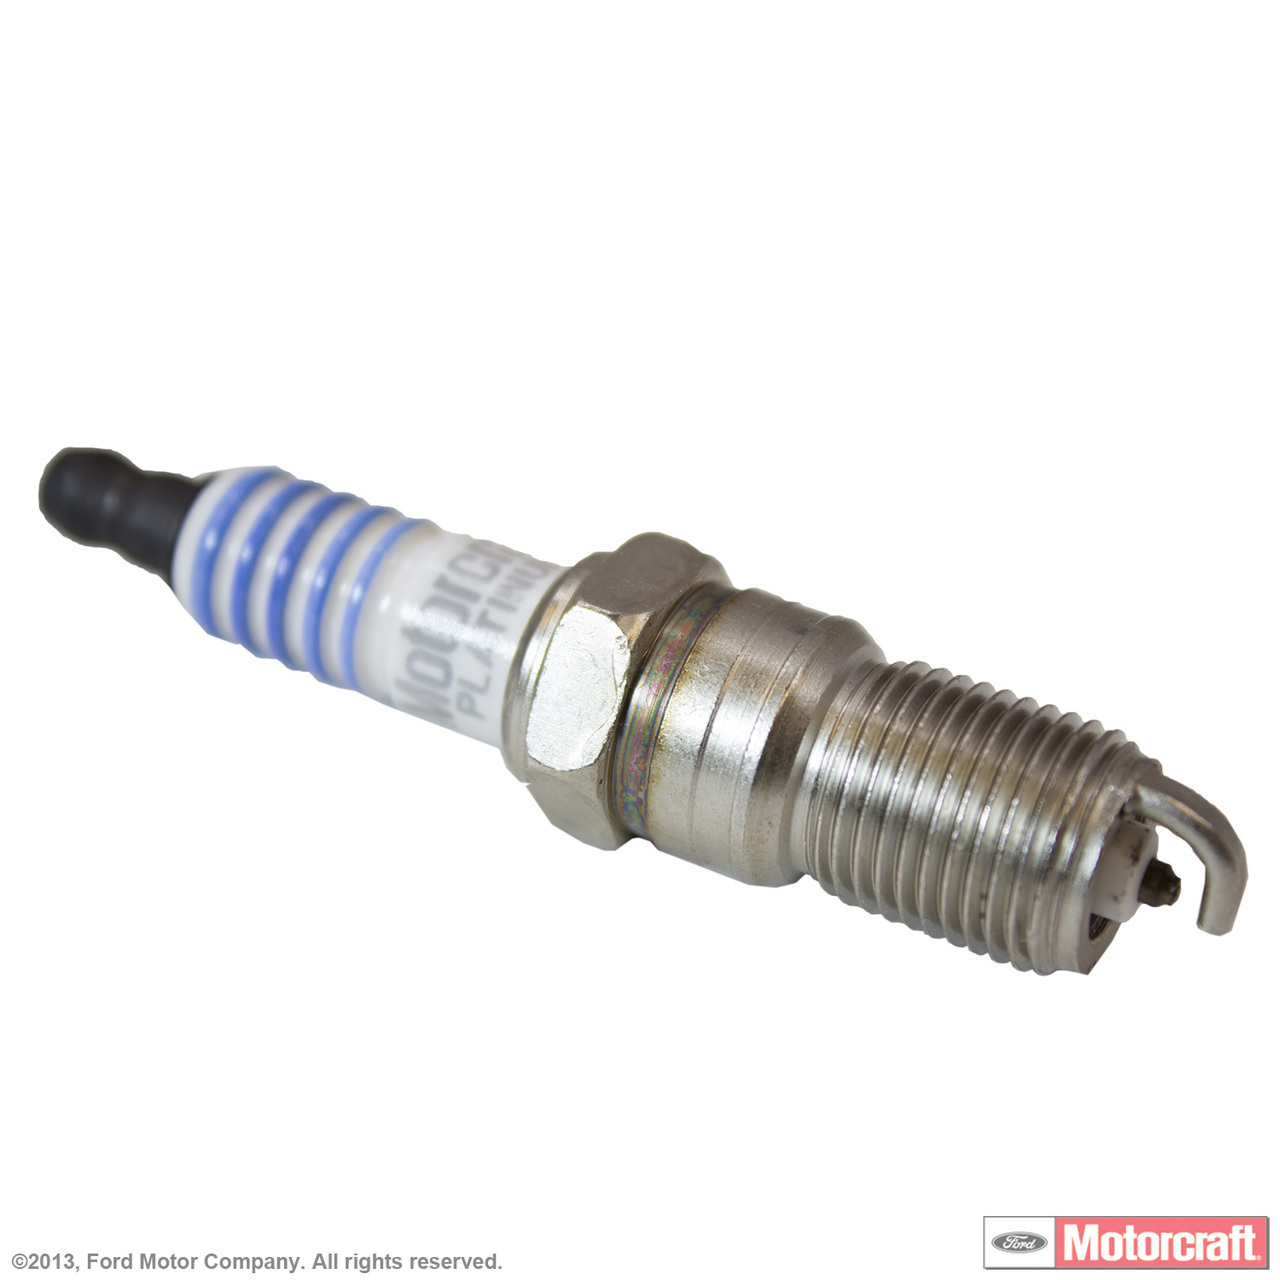 Motorcraft spark plugs ford expedition #4